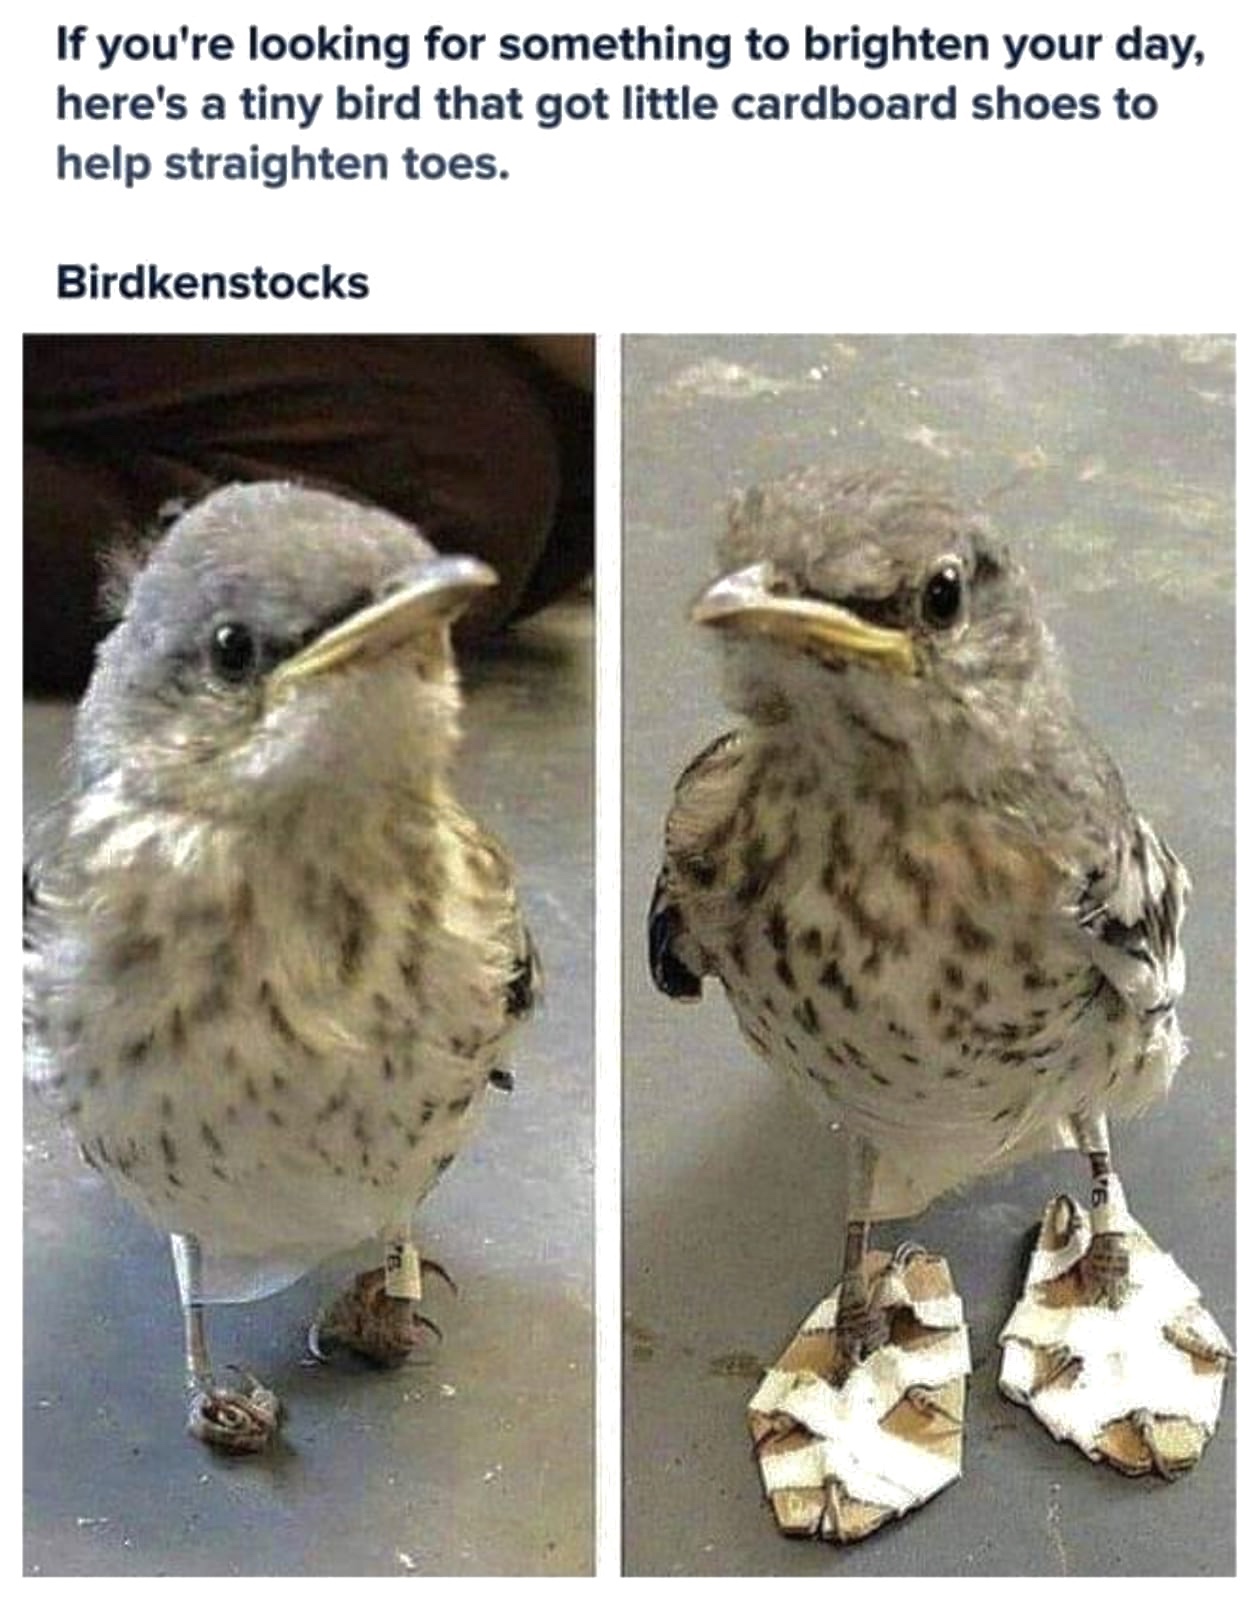 bird with shoes - If you're looking for something to brighten your day, here's a tiny bird that got little cardboard shoes to help straighten toes. Birdkenstocks